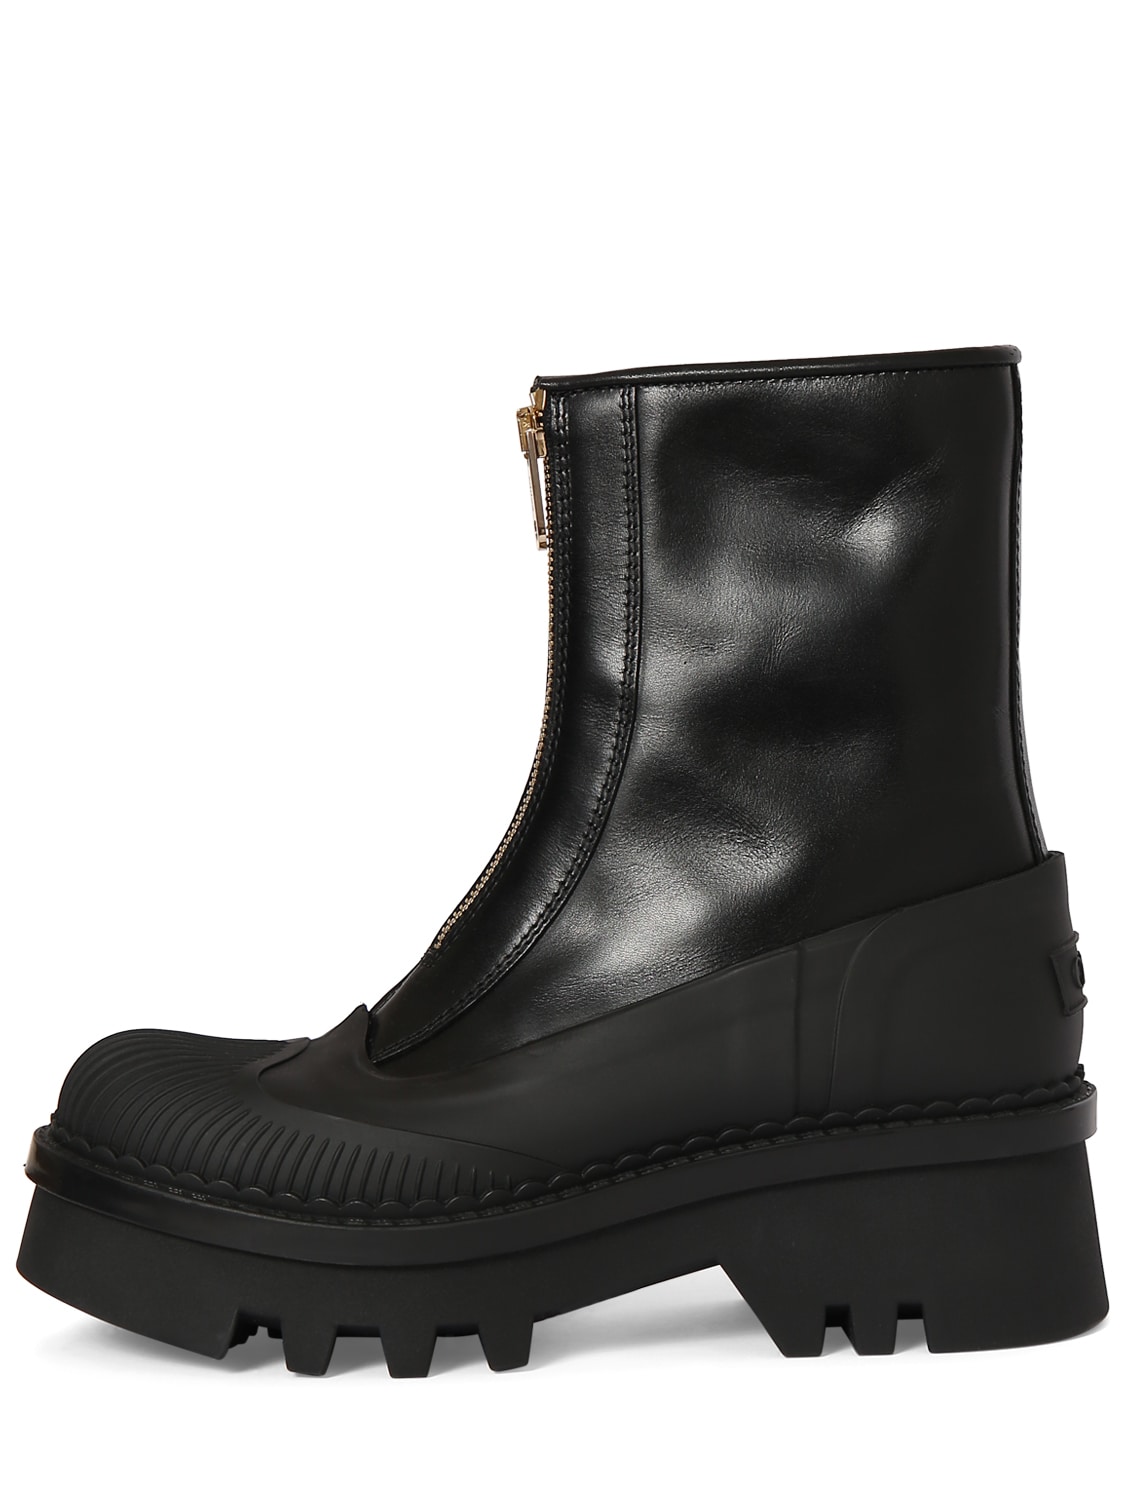 Chloé 40mm Raina Leather Zip Boots In Black